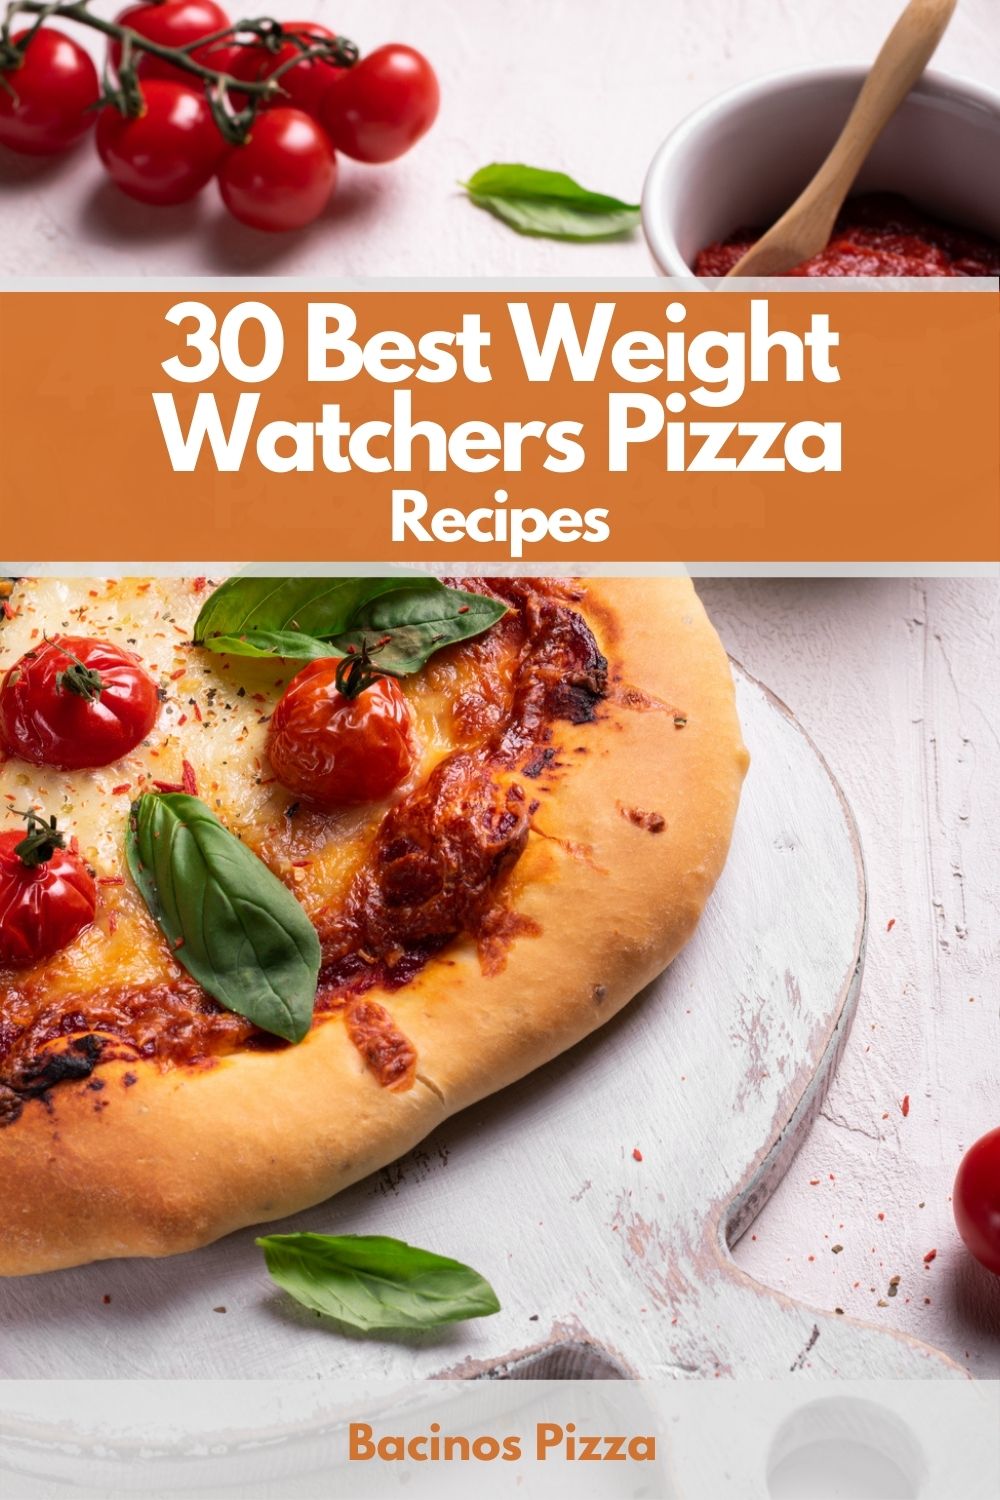 30 Best Weight Watchers Pizza Recipes pin